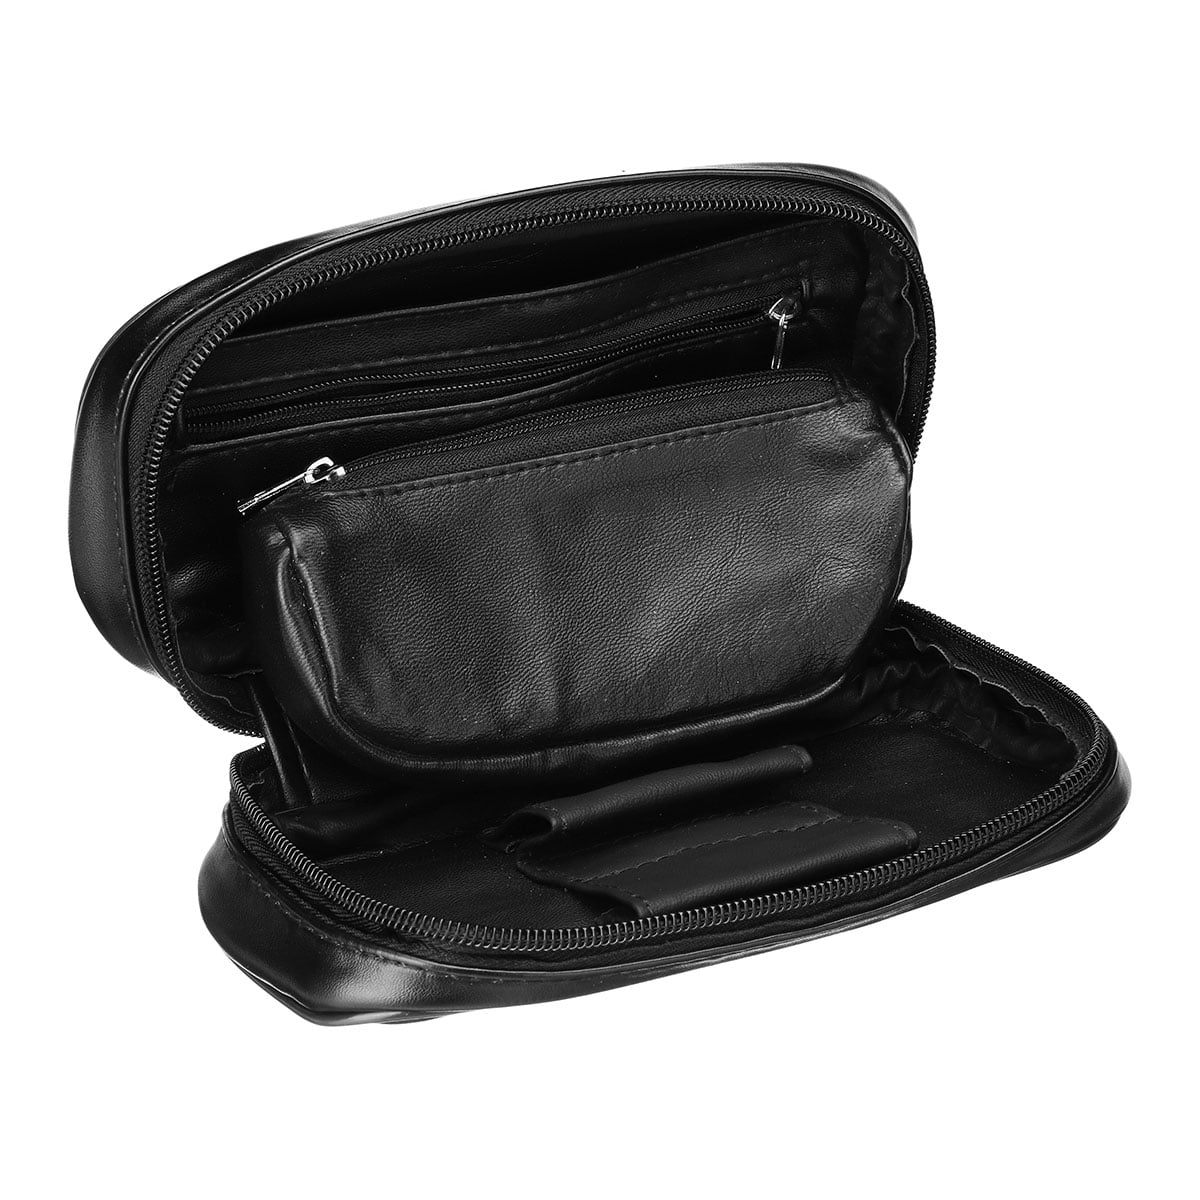 Tobacco Pouch Durable Portable Smoking Pipe Case Bag Holds 2 Pipes Soft Leather 